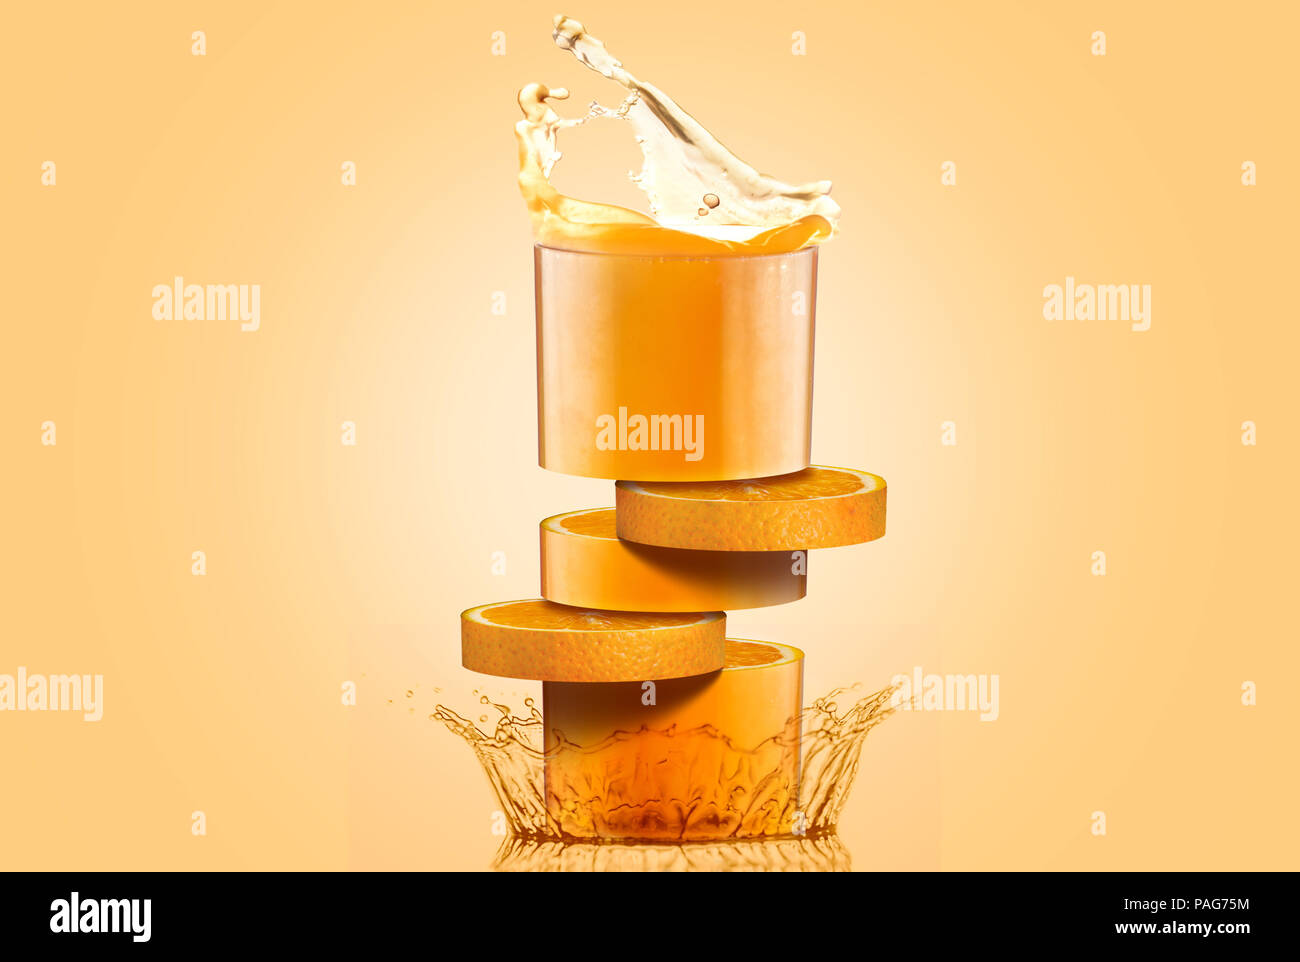 Orange juice composite photo, showing a glass divided on orange slices, splashing on a reflective surface, idea and concept Stock Photo